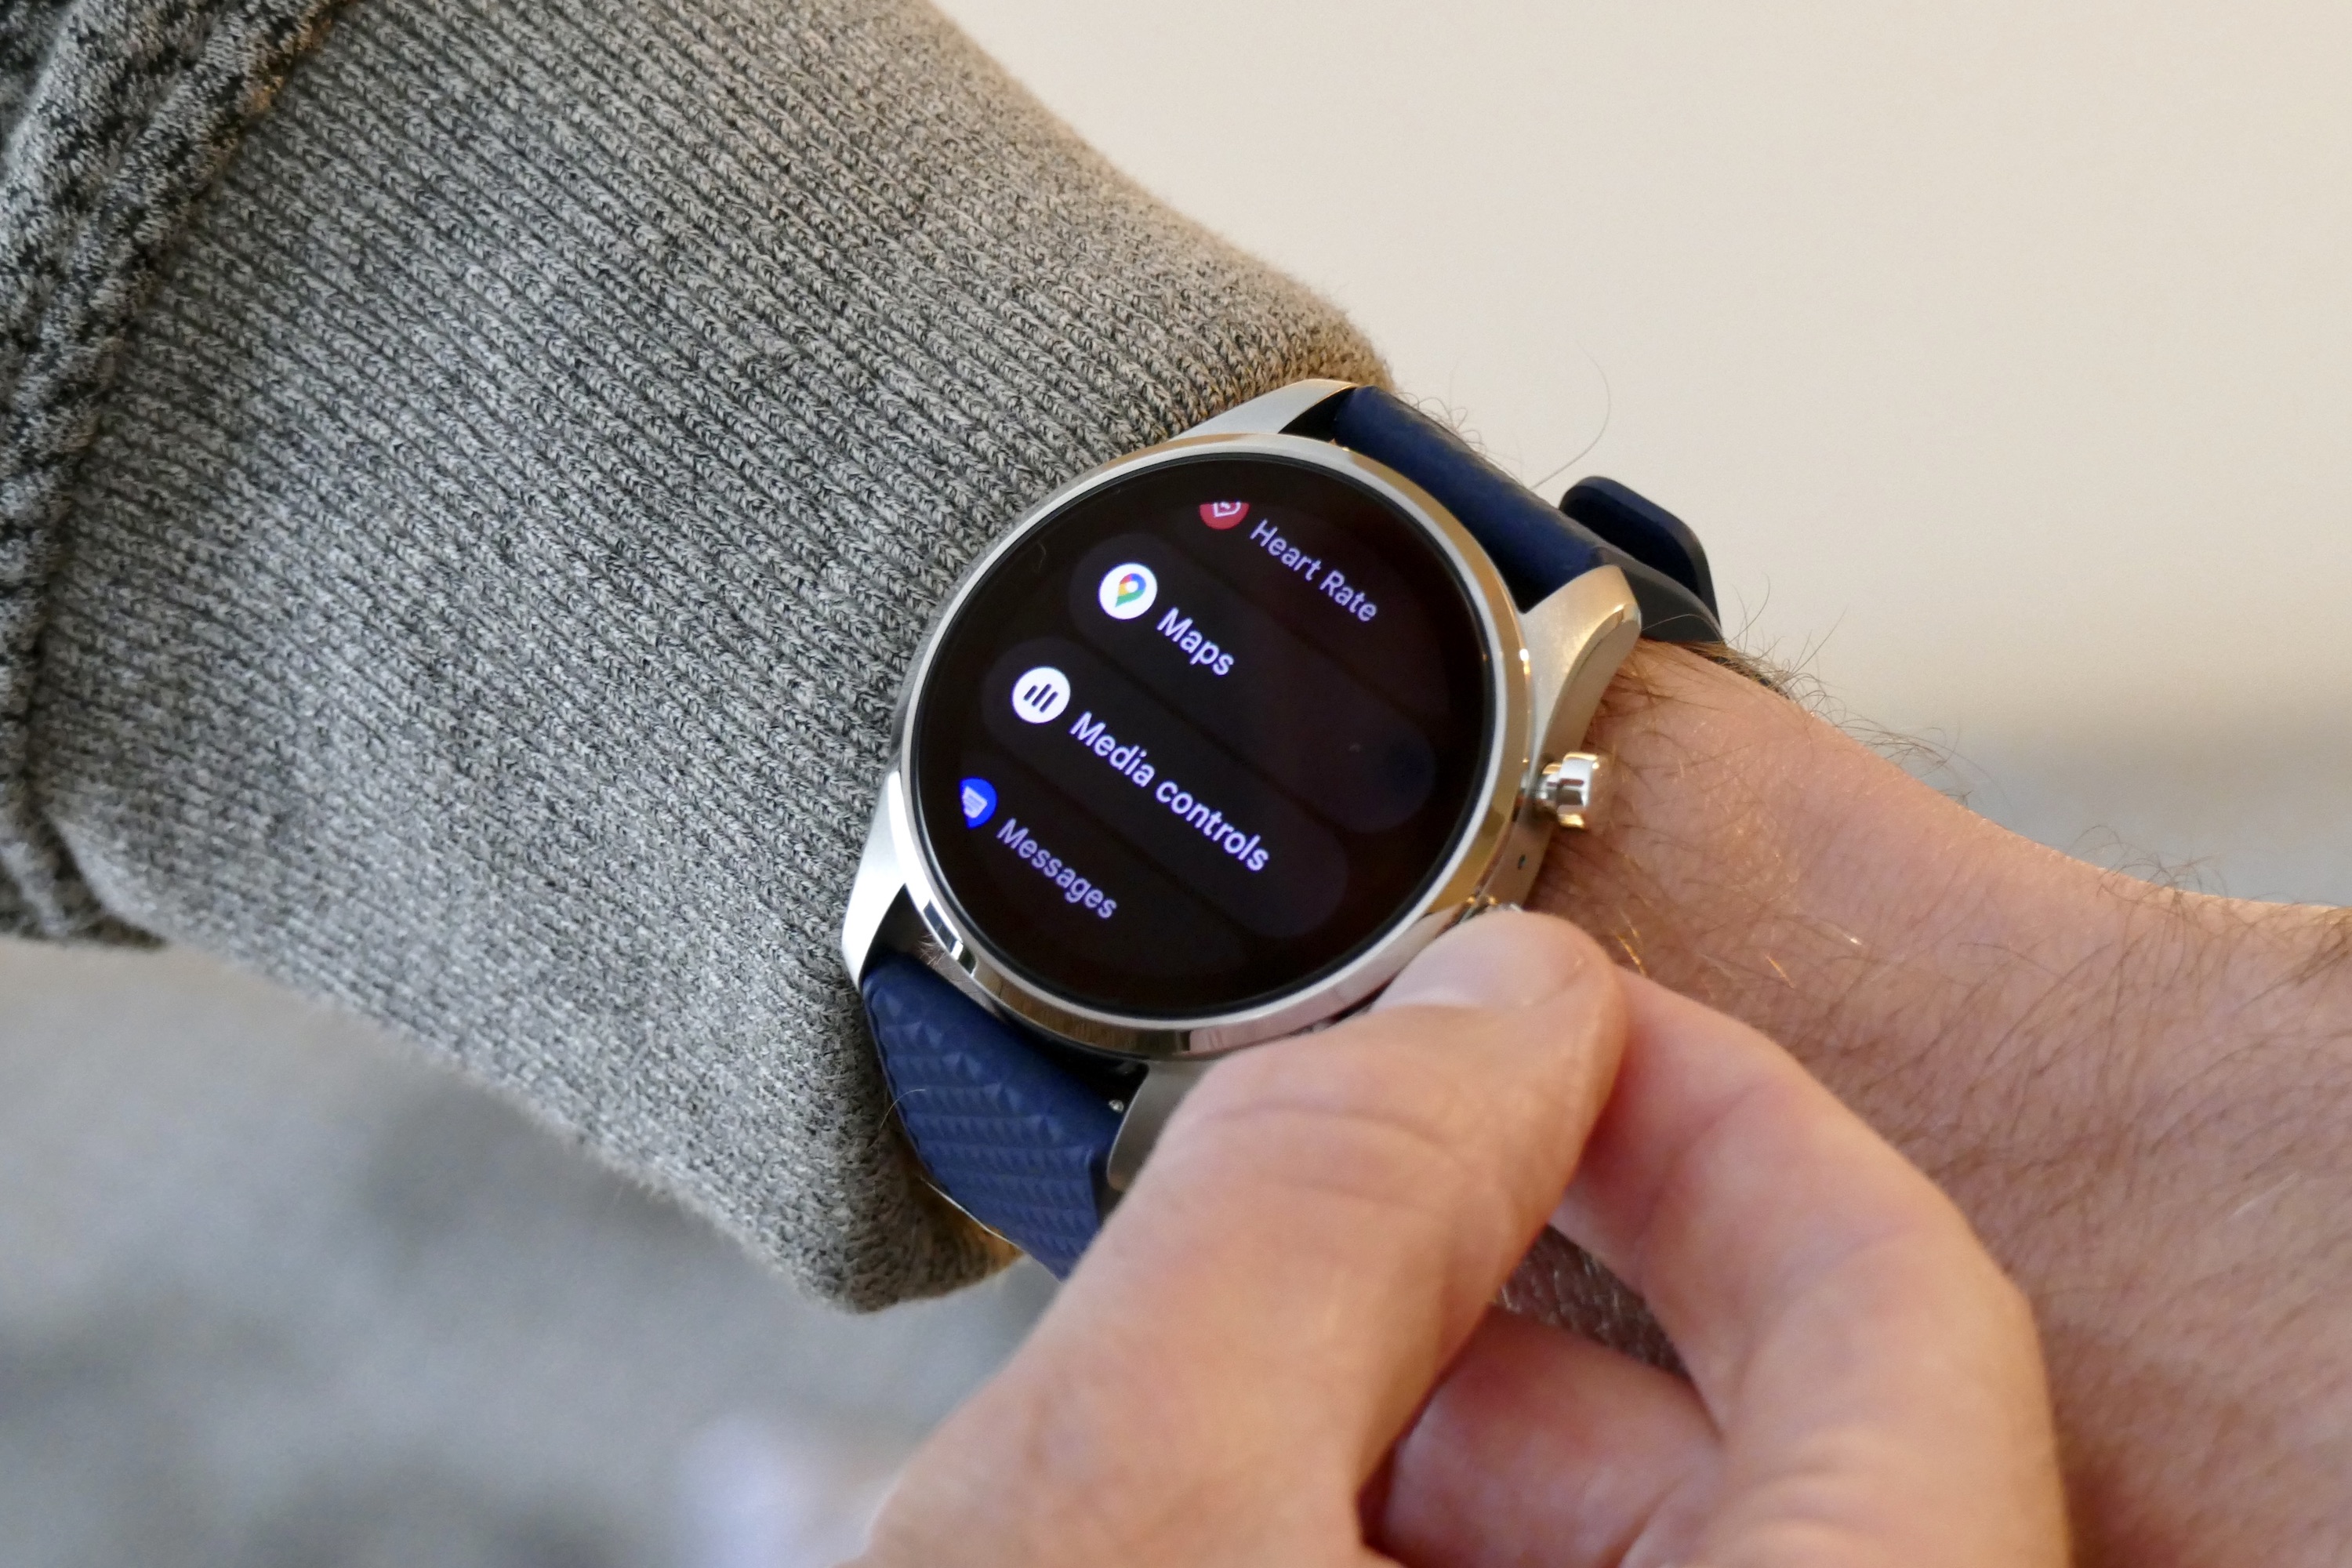 You'll Need Wear OS 3 To Use The Smartwatch  Music App